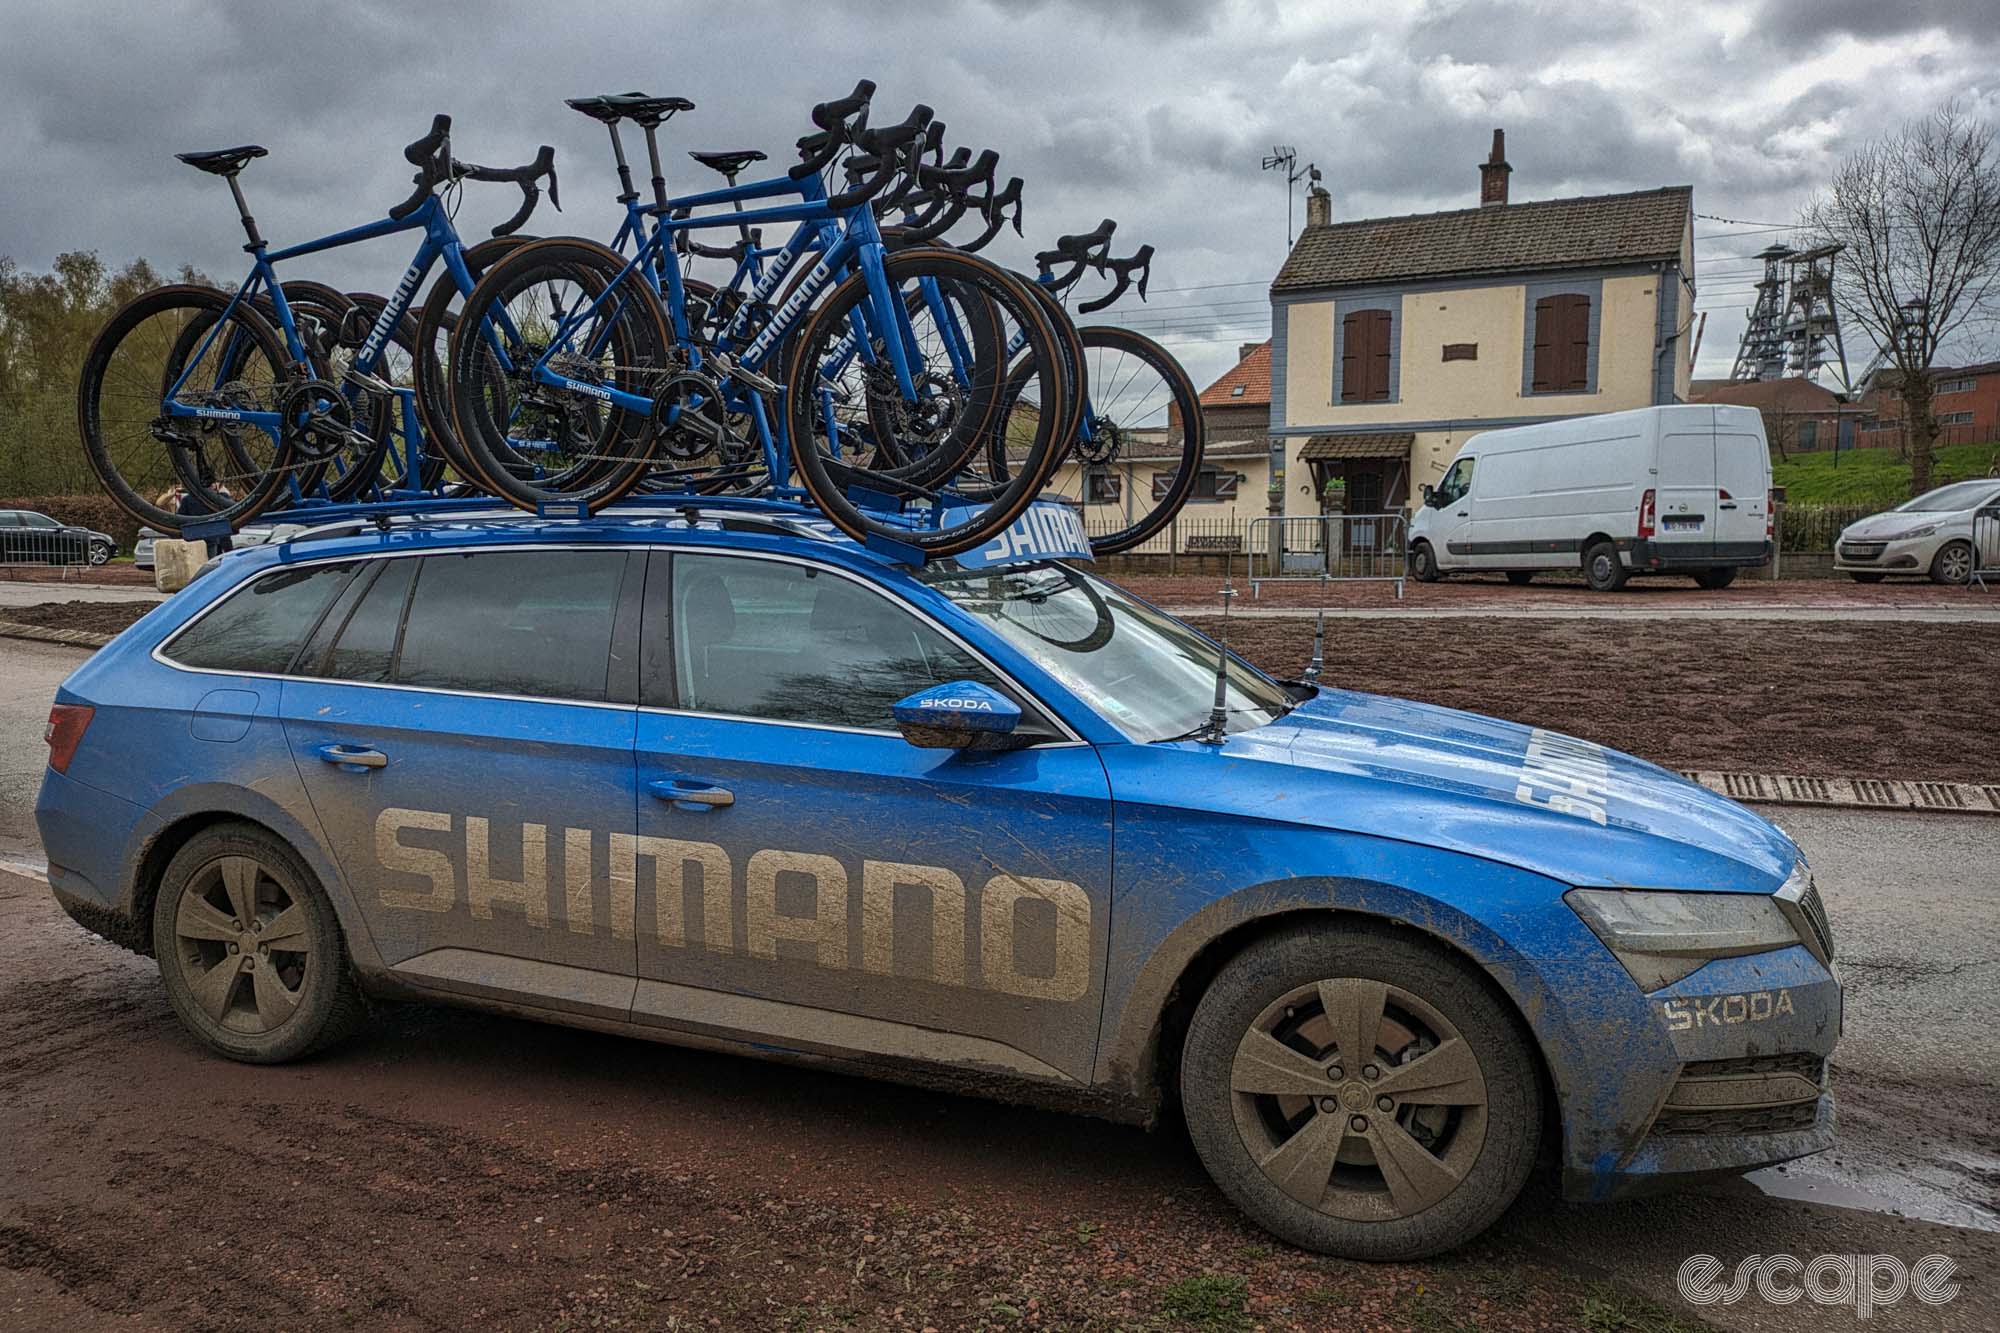 The Shimano neutral service car at the end of the day. Its bright blue paint is now thoroughly covered with brown mud and the white Shimano logo is grey-brown.